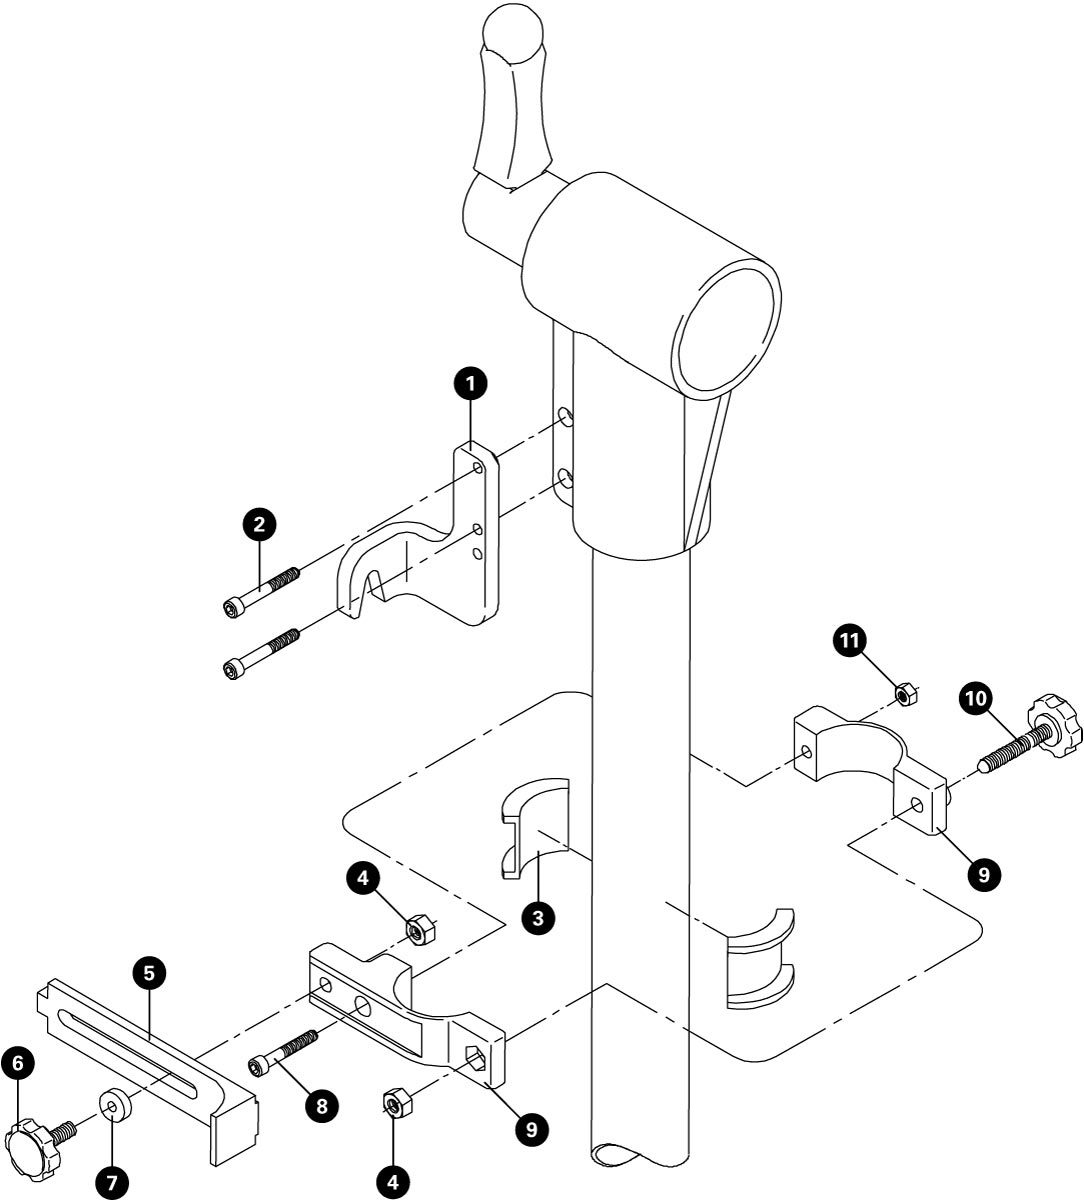 Parts diagram for TS-5 Repair Stand Mounted Truing Stand, click to enlarge